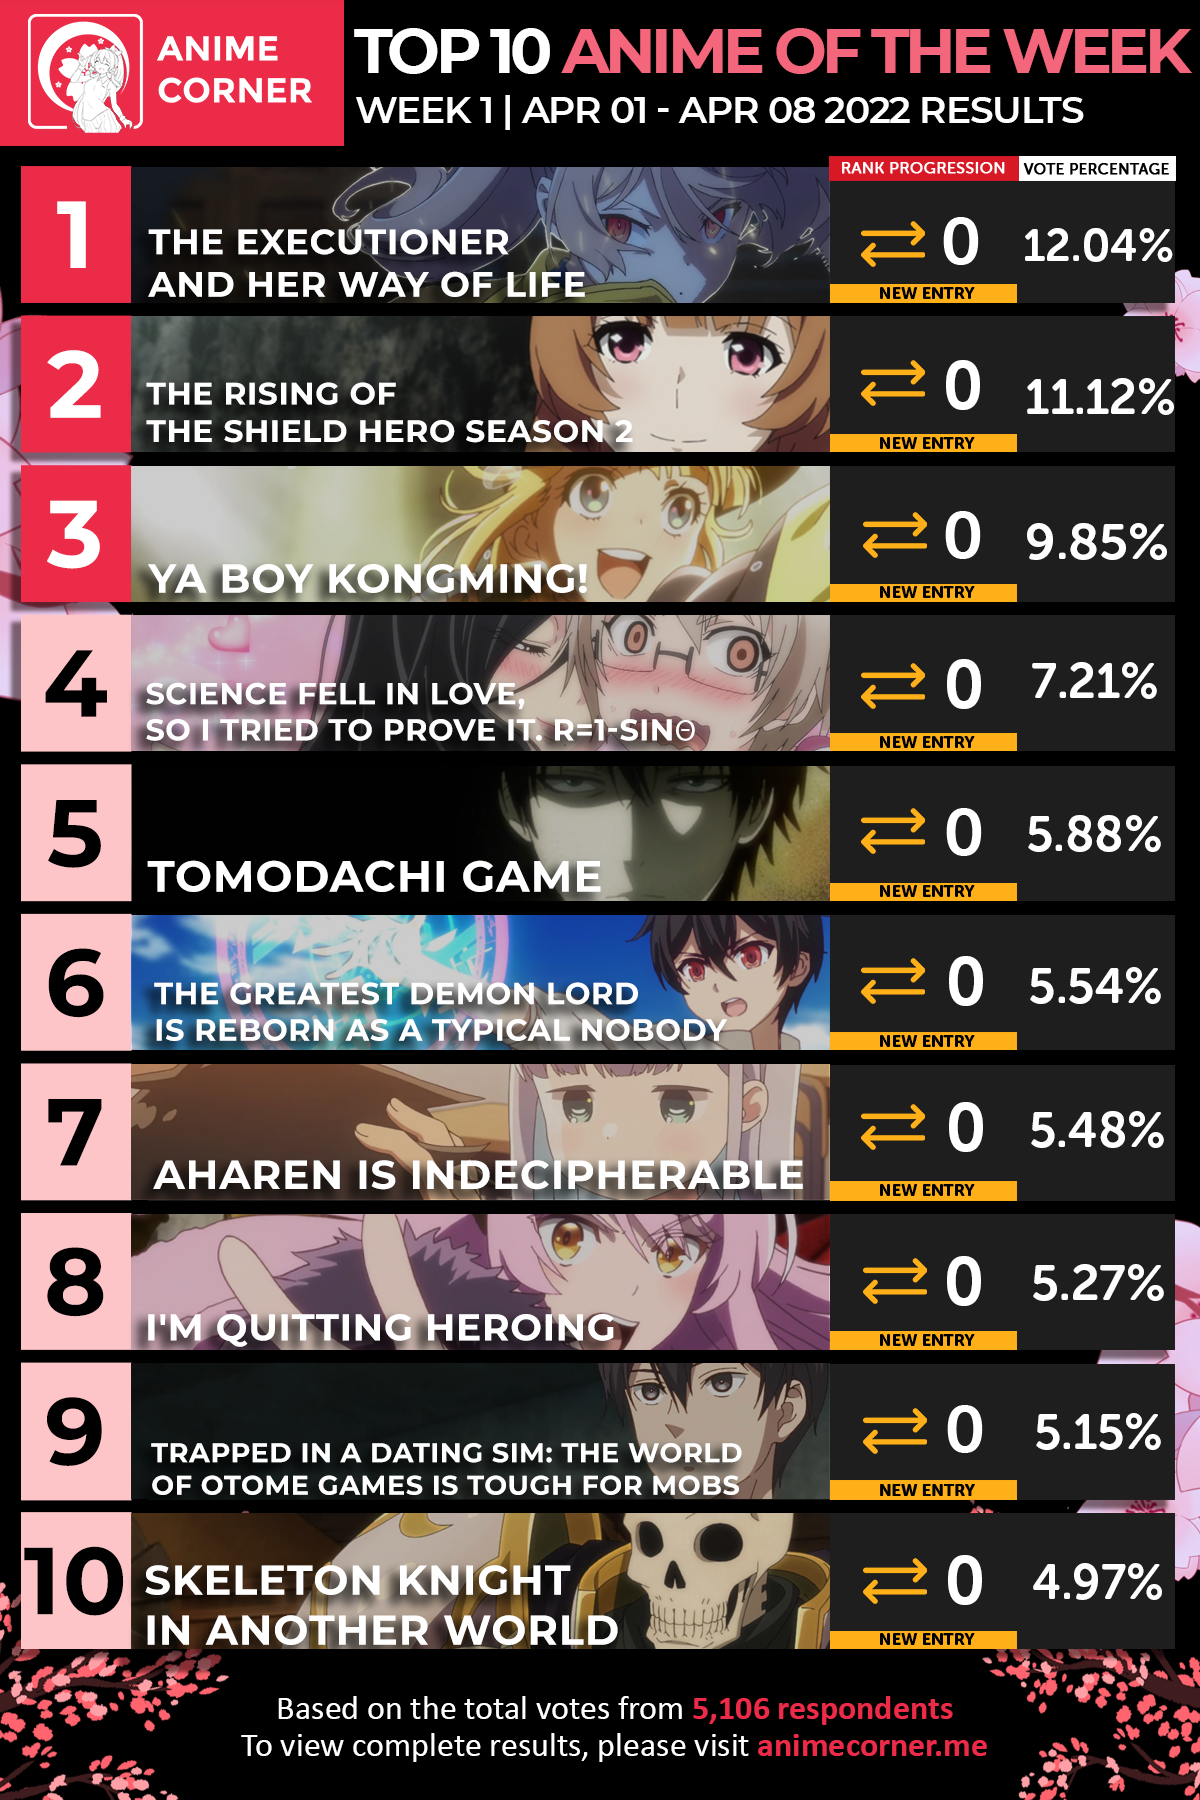 Top 10 Anime of the Week 01 - Spring 2022